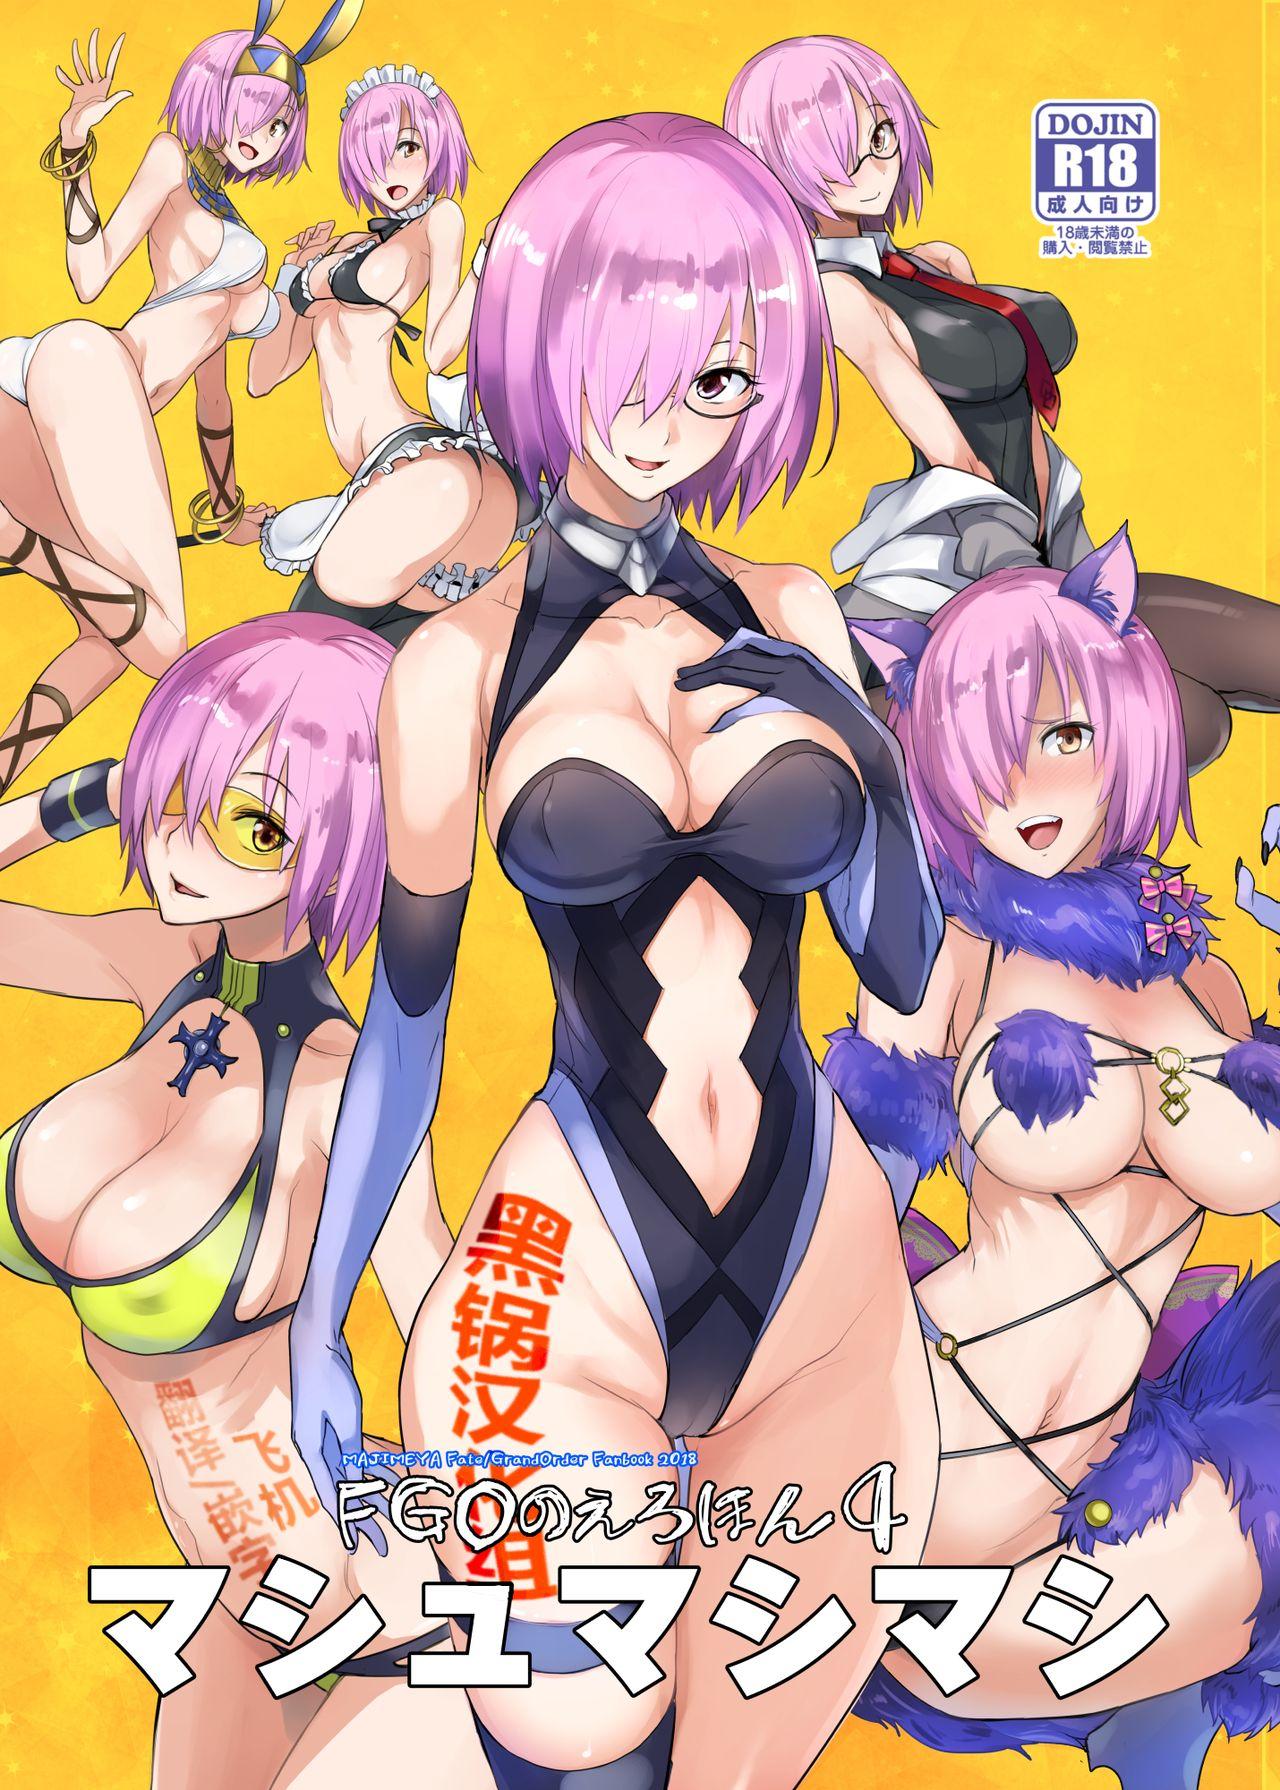 Heels FGO no Erohon 4 - Fate grand order Sex Toy - Picture 1